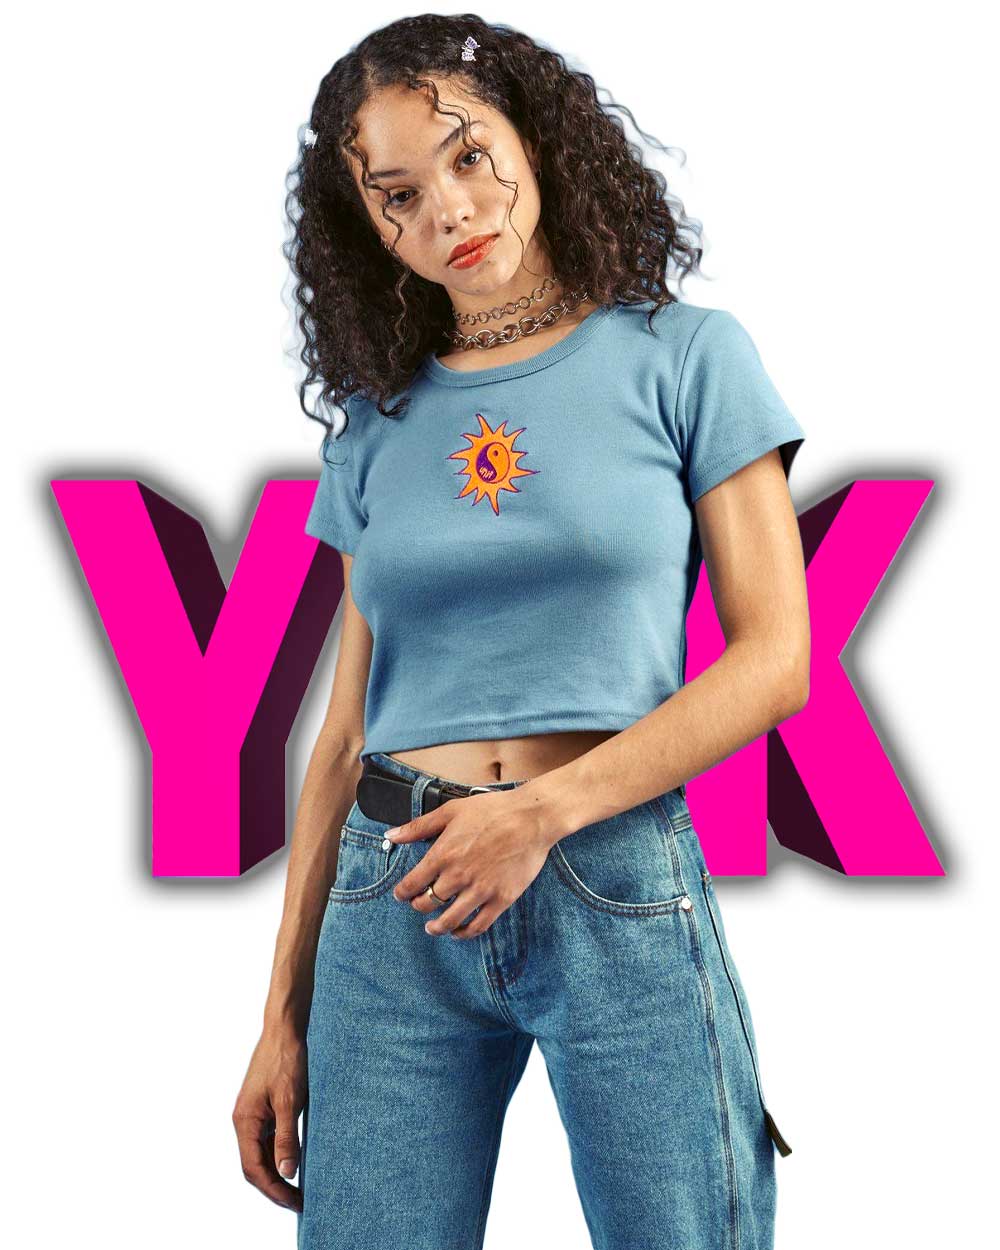 Y2K Fashion FULL Guide + 16 STORES To Dress Like Y2K (2022)